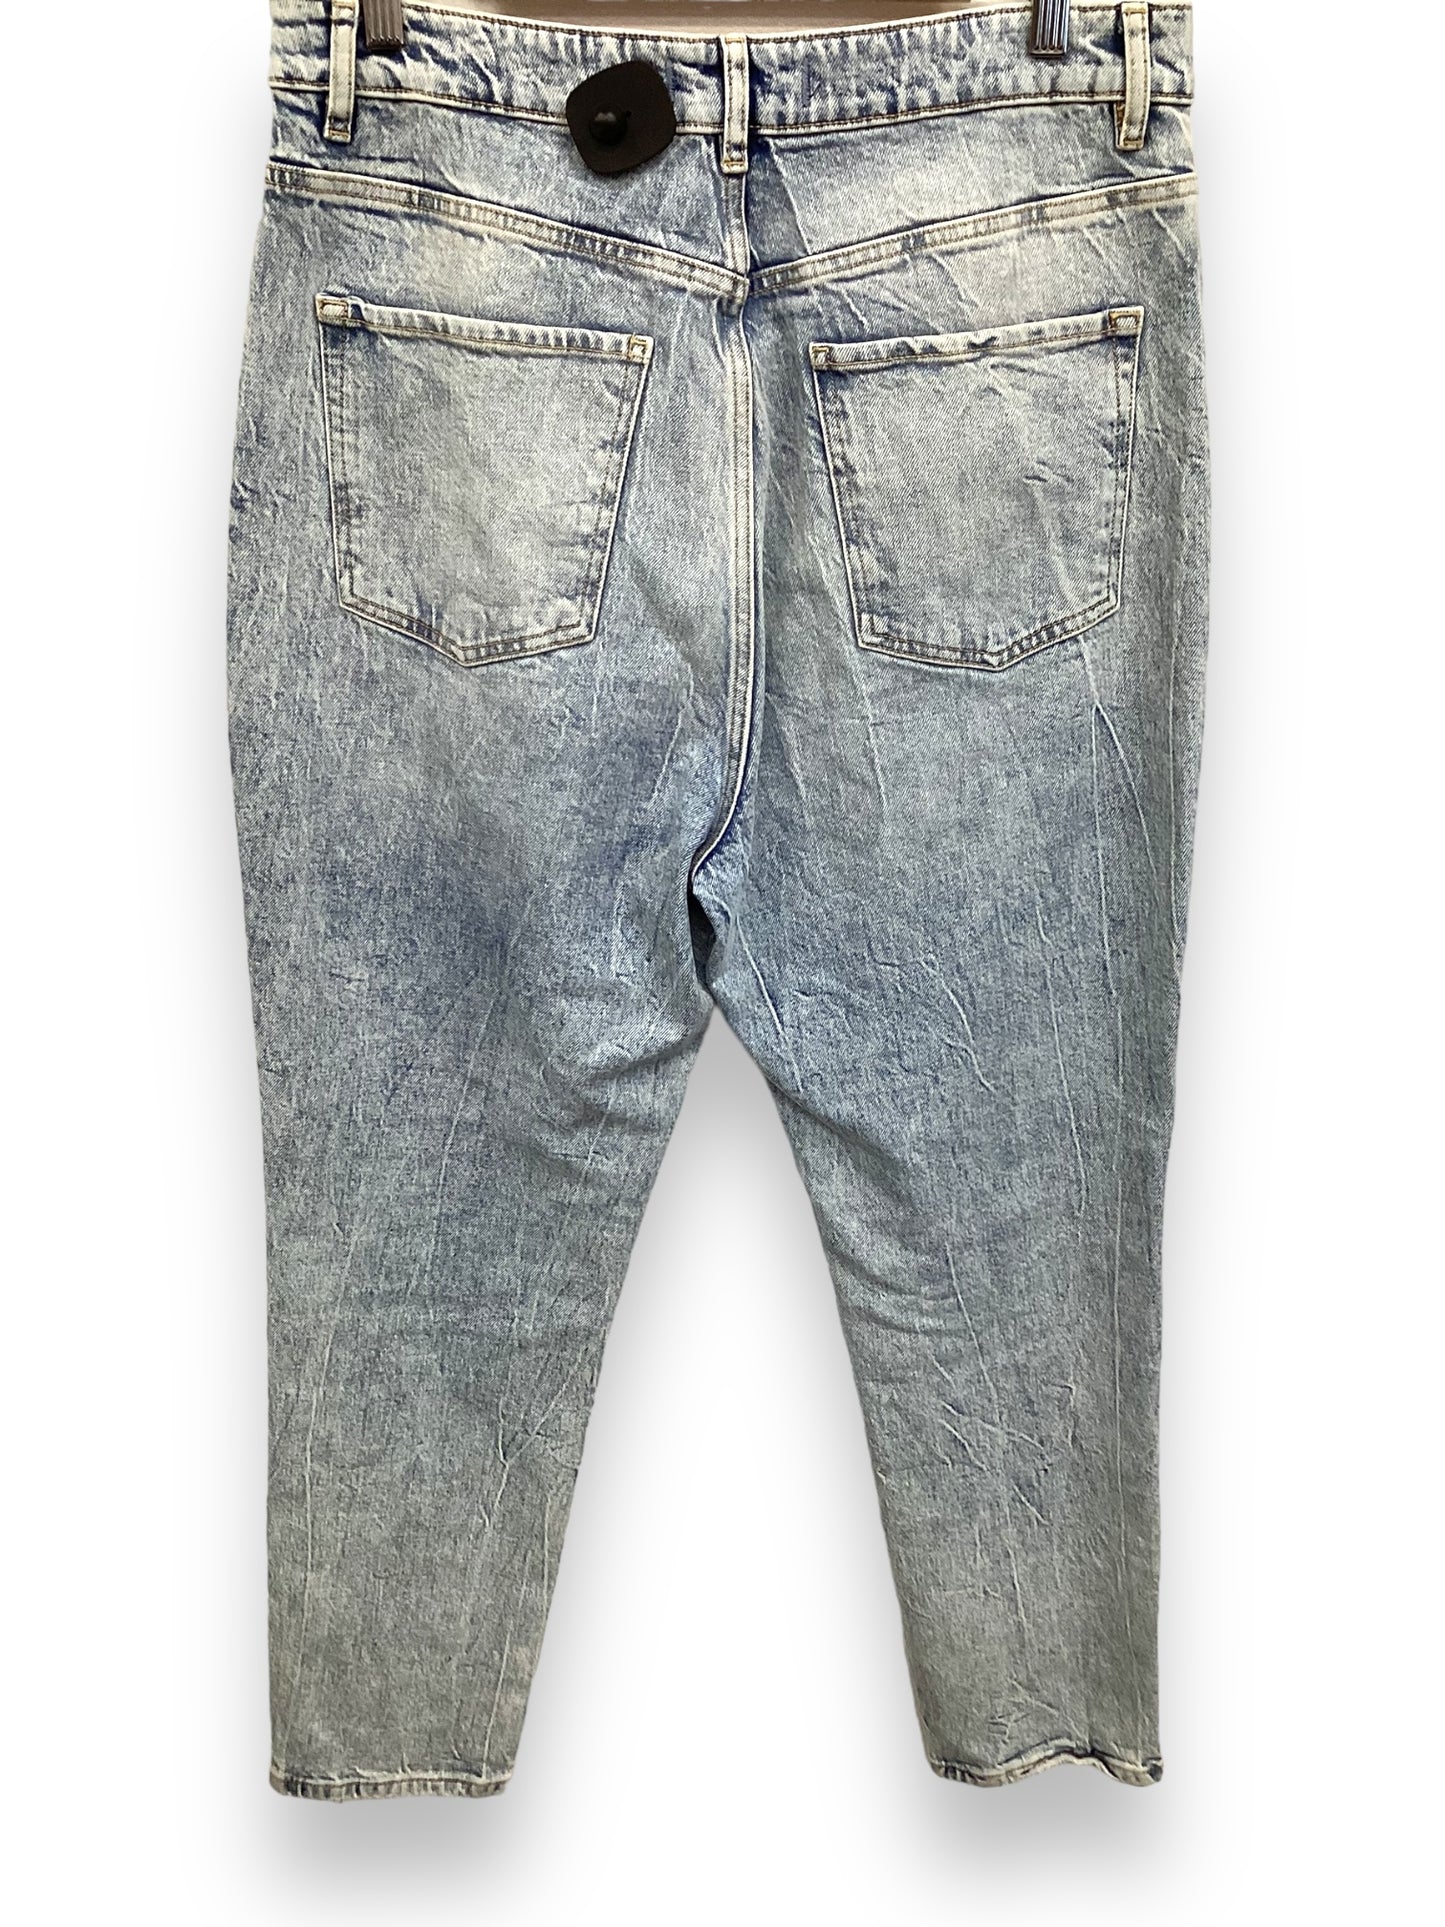 Jeans Relaxed/boyfriend By Free People  Size: 14